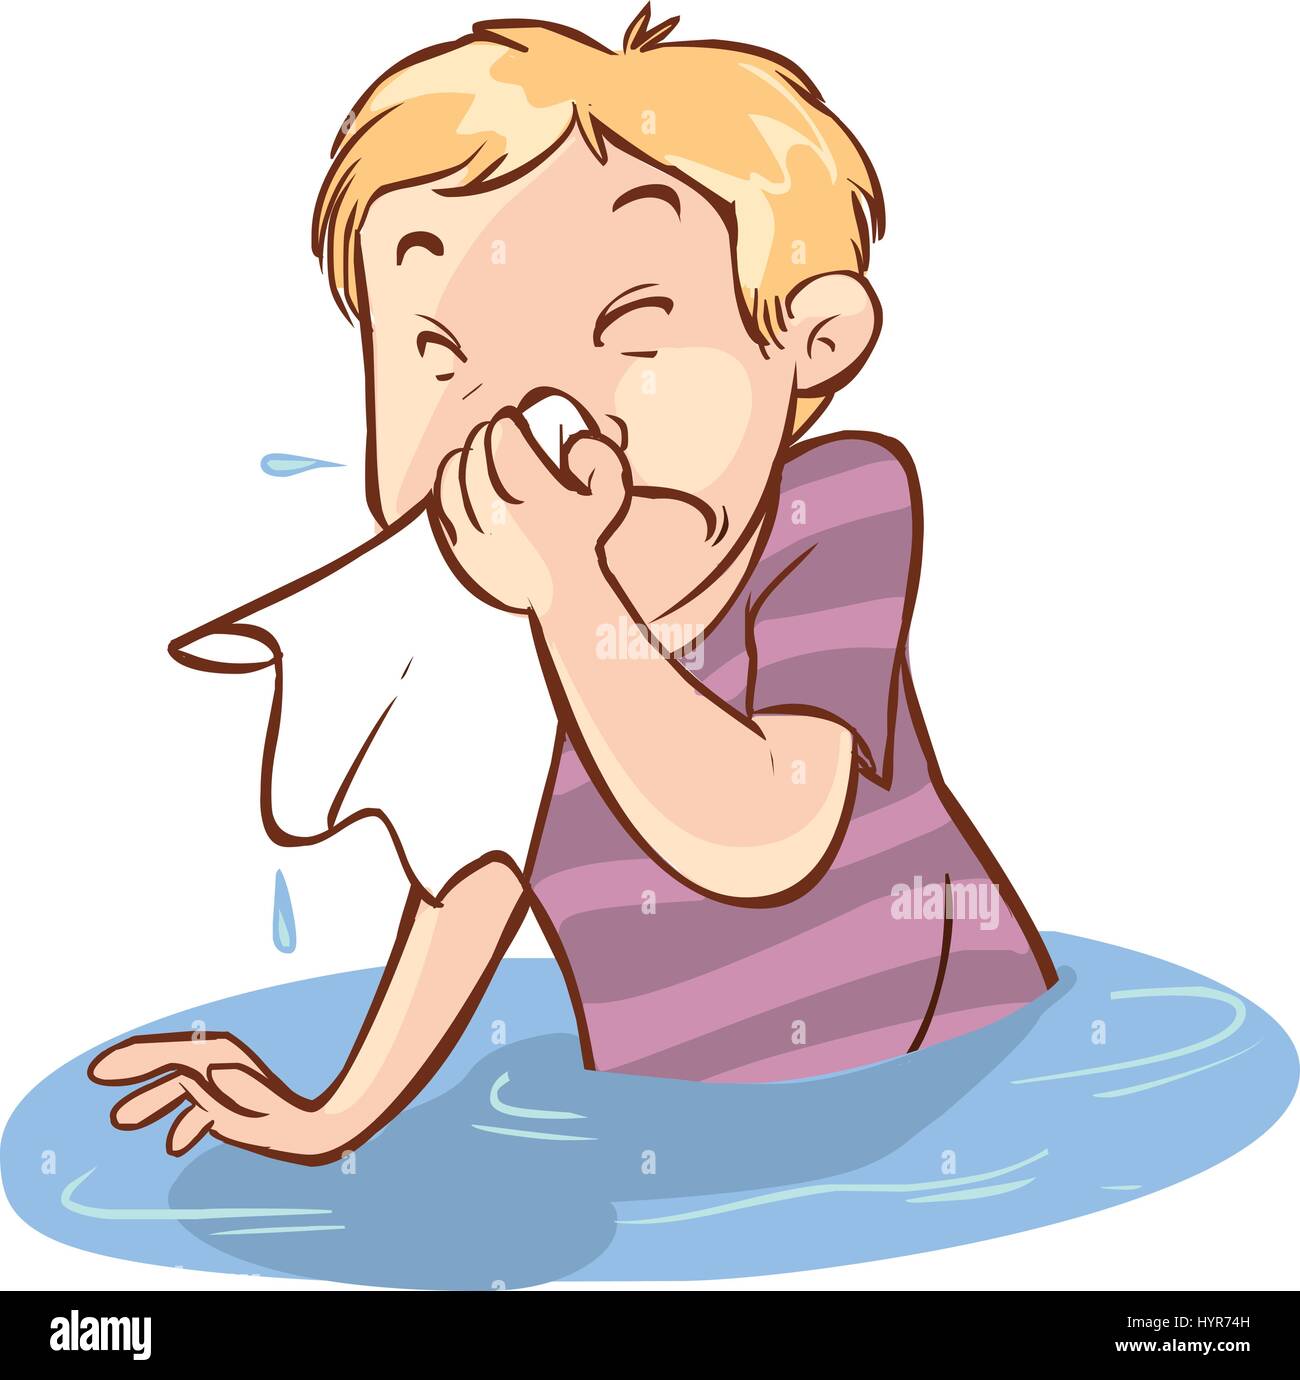 vector illustration of a runny nose people Stock Vector